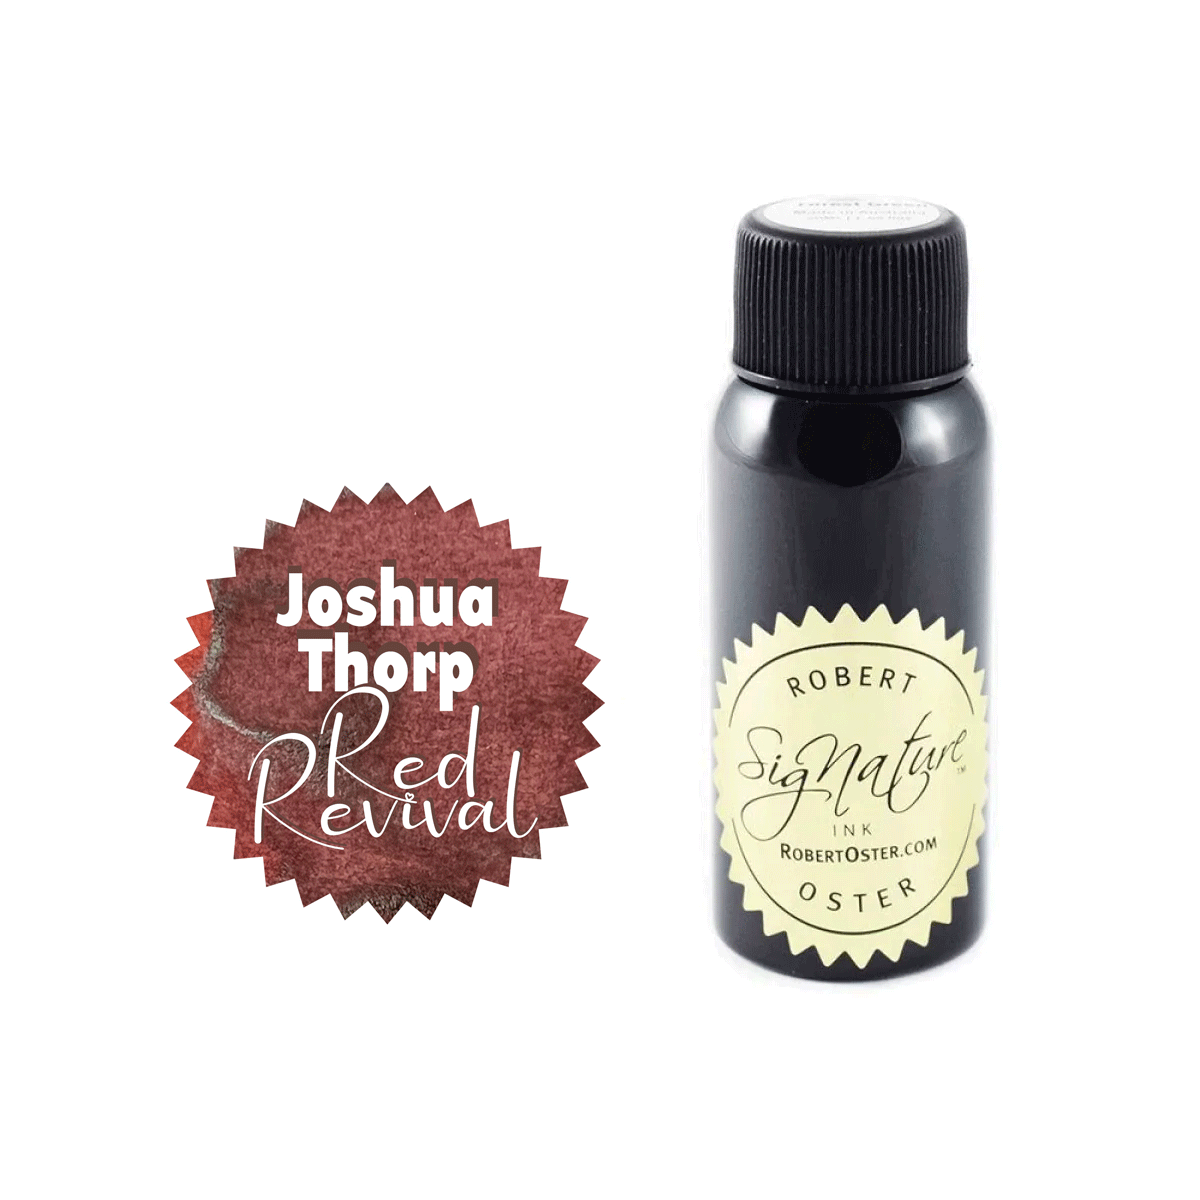 Robert Oster Signature Ink Bottle Joshua Thorp Red Revival - Pencraft the boutique